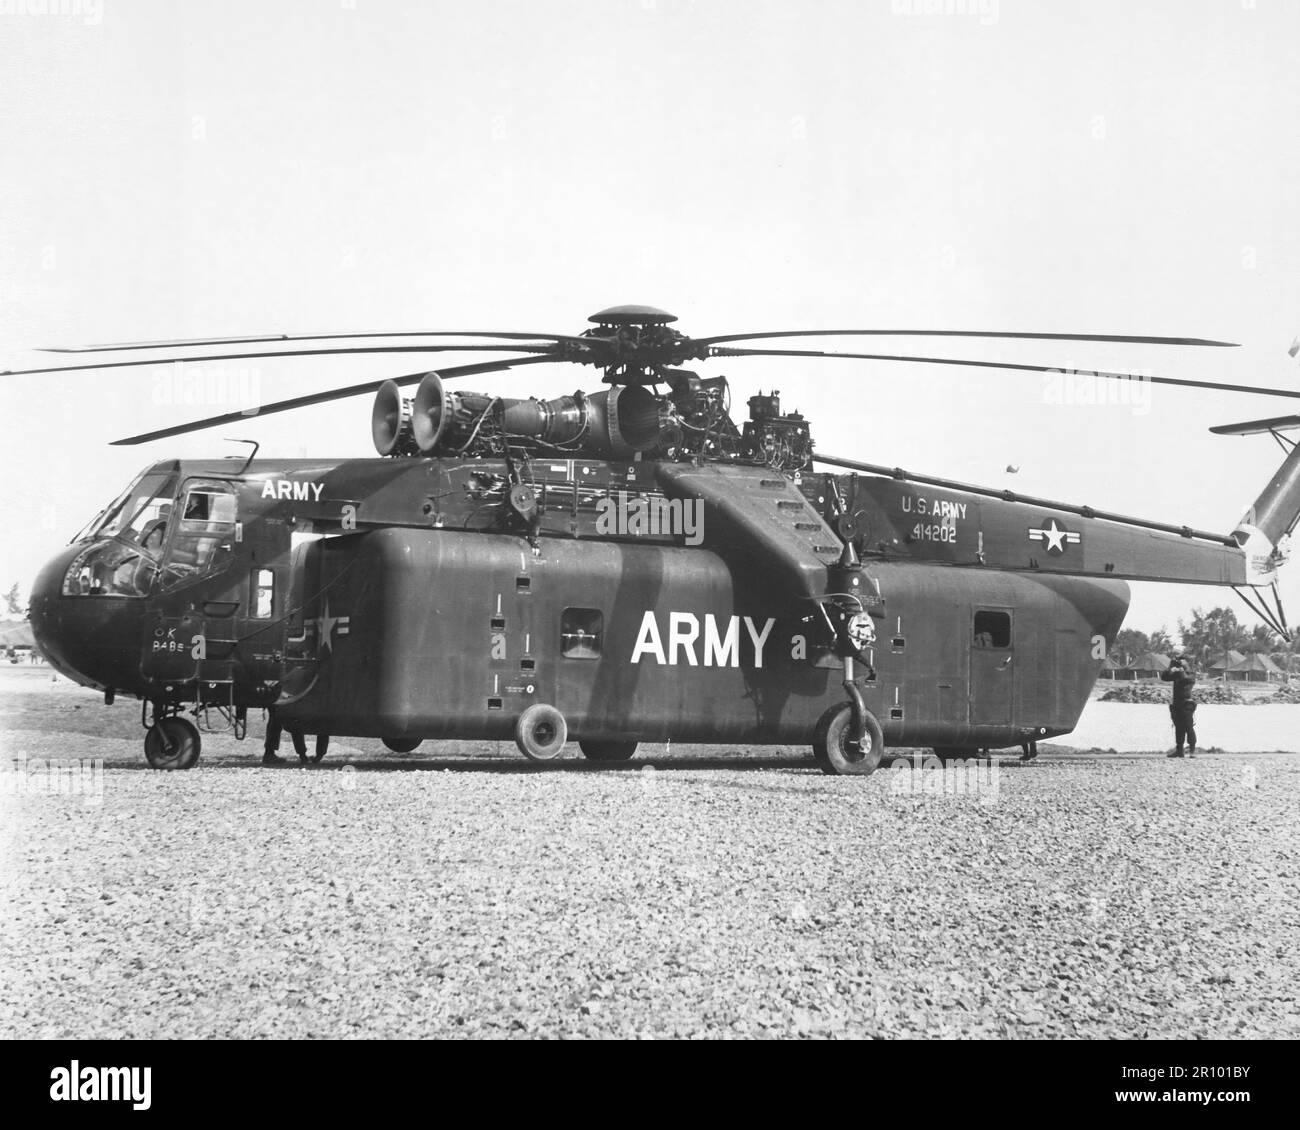 One of the unique pieces of equipment brought to Vietnam by the 1st Cavalry Division (Airmobile), U.S. Army, is the huge Sky Crane CH-54A helicopter which can lift tremendous loads. Circa 1960. Stock Photo